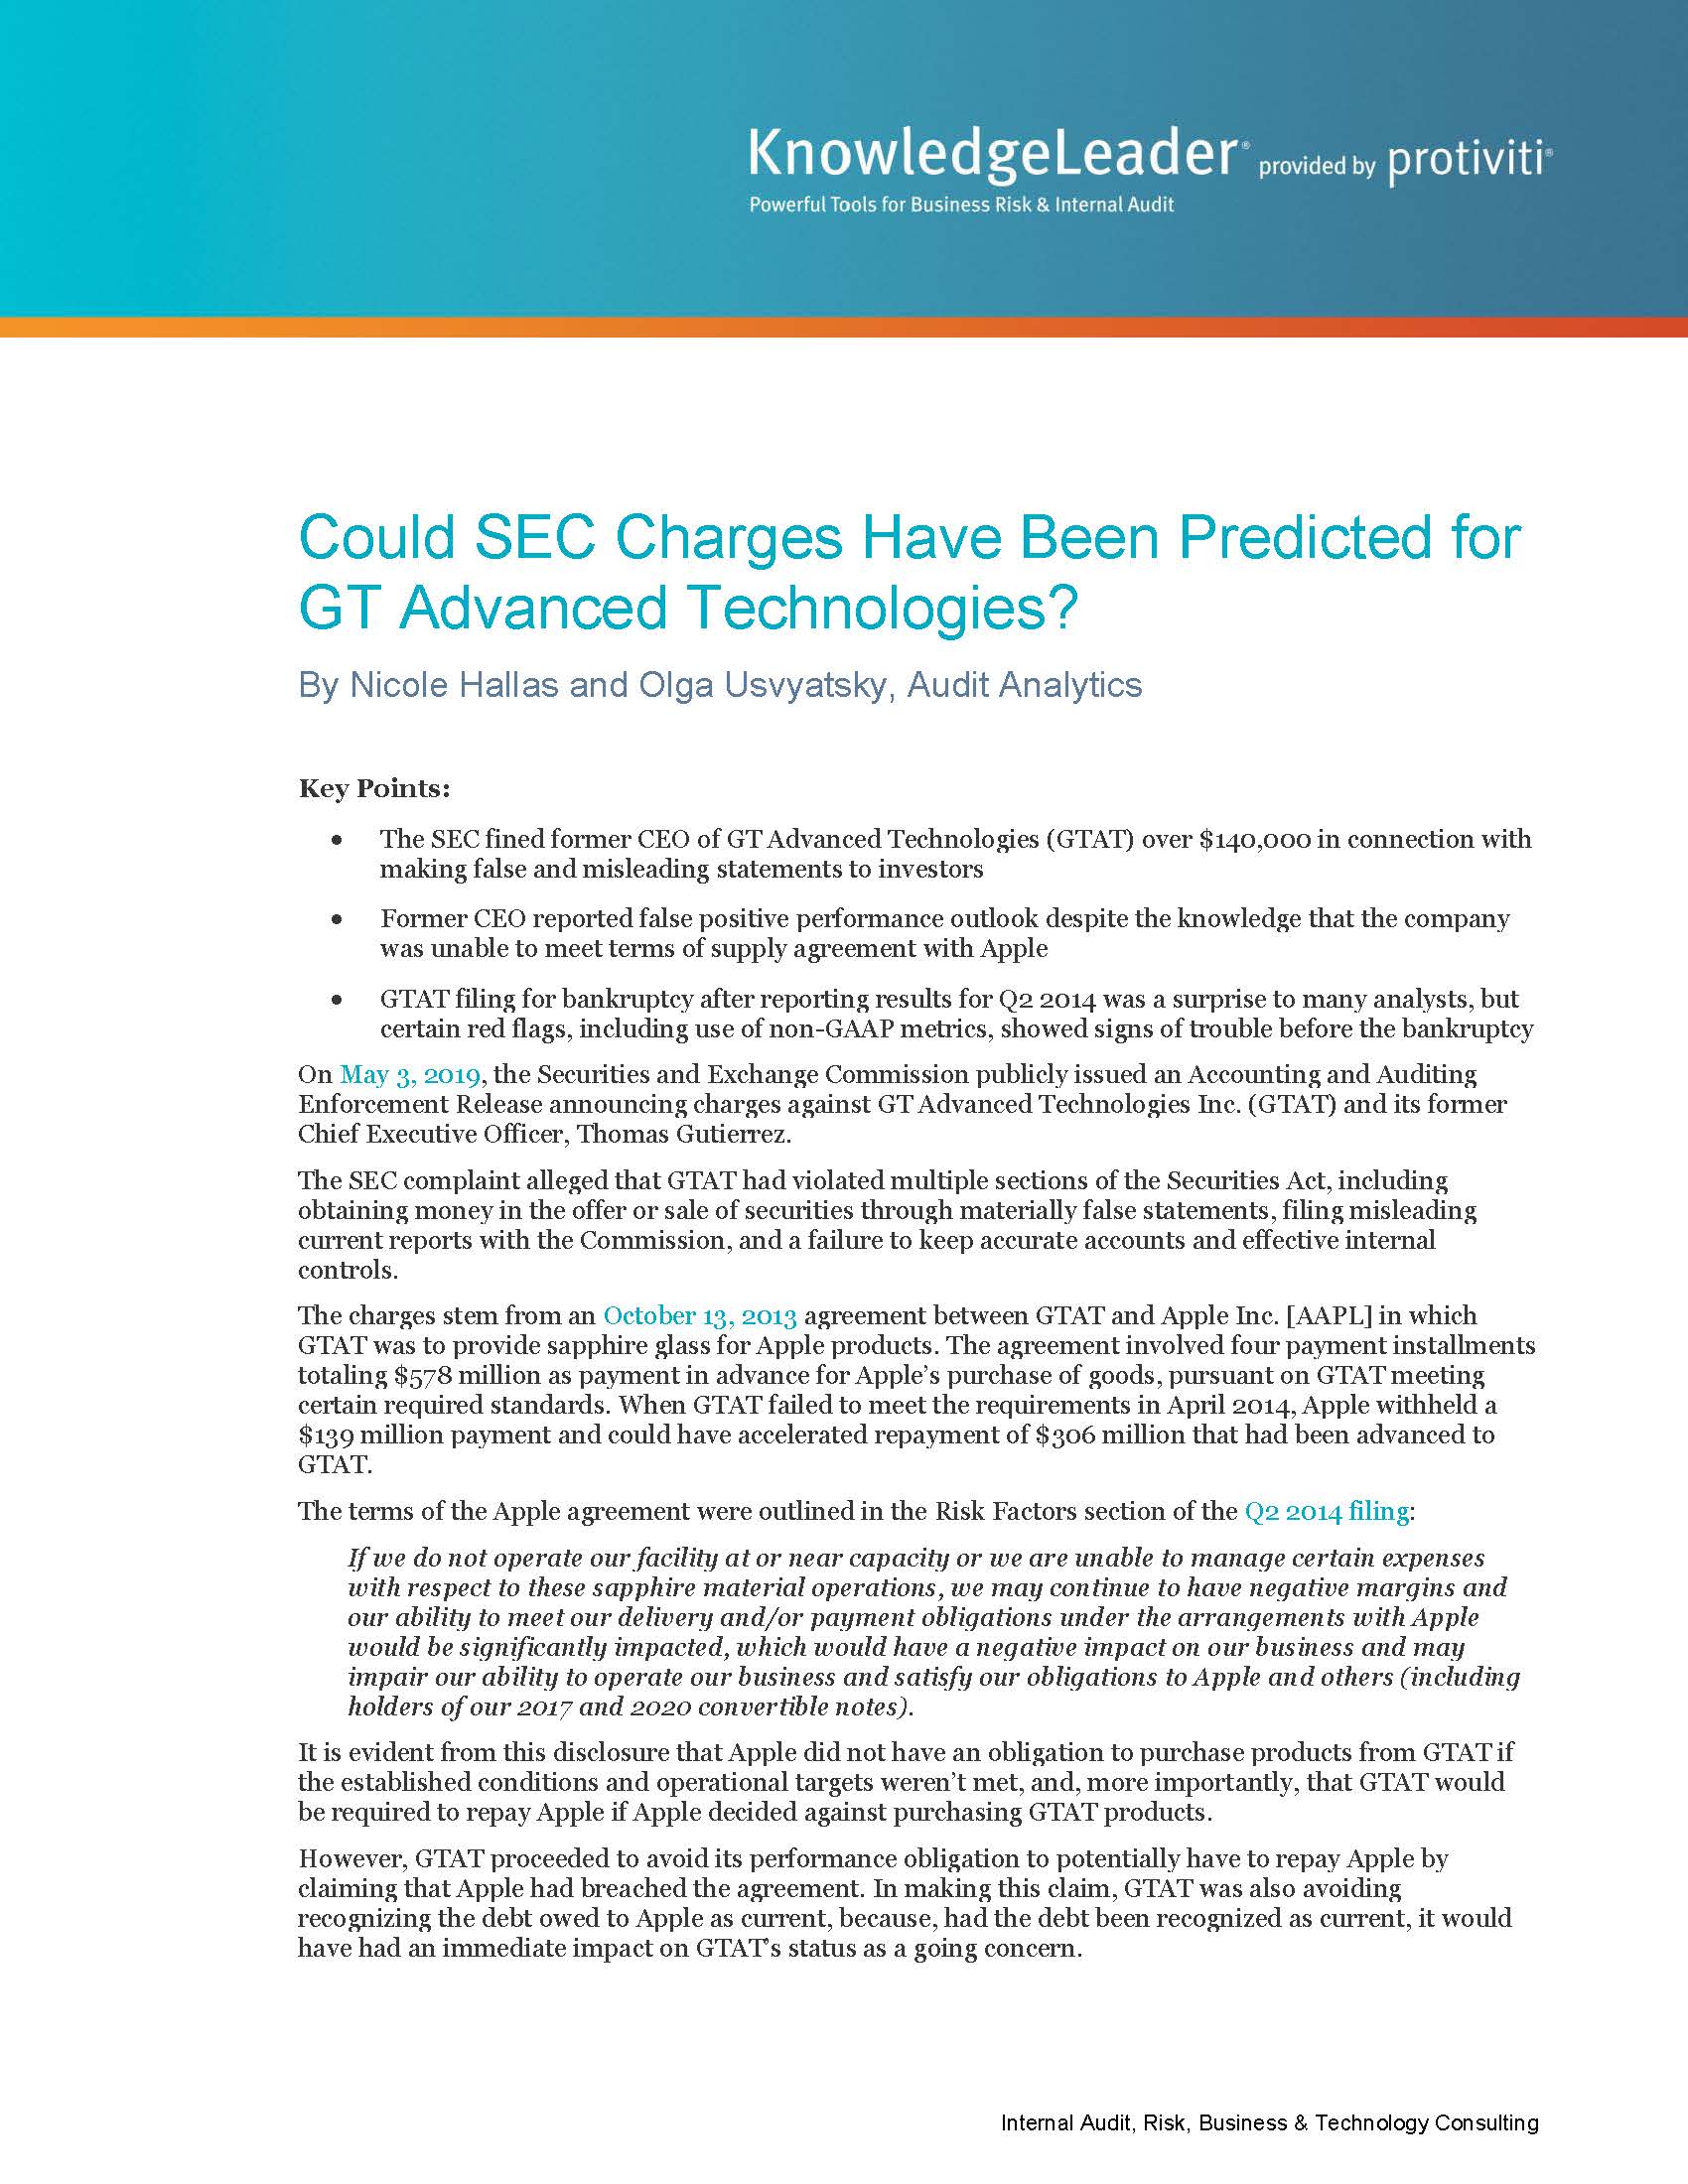 Screenshot of the first page of Could SEC Charges Have Been Predicted for GT Advanced Technologies?